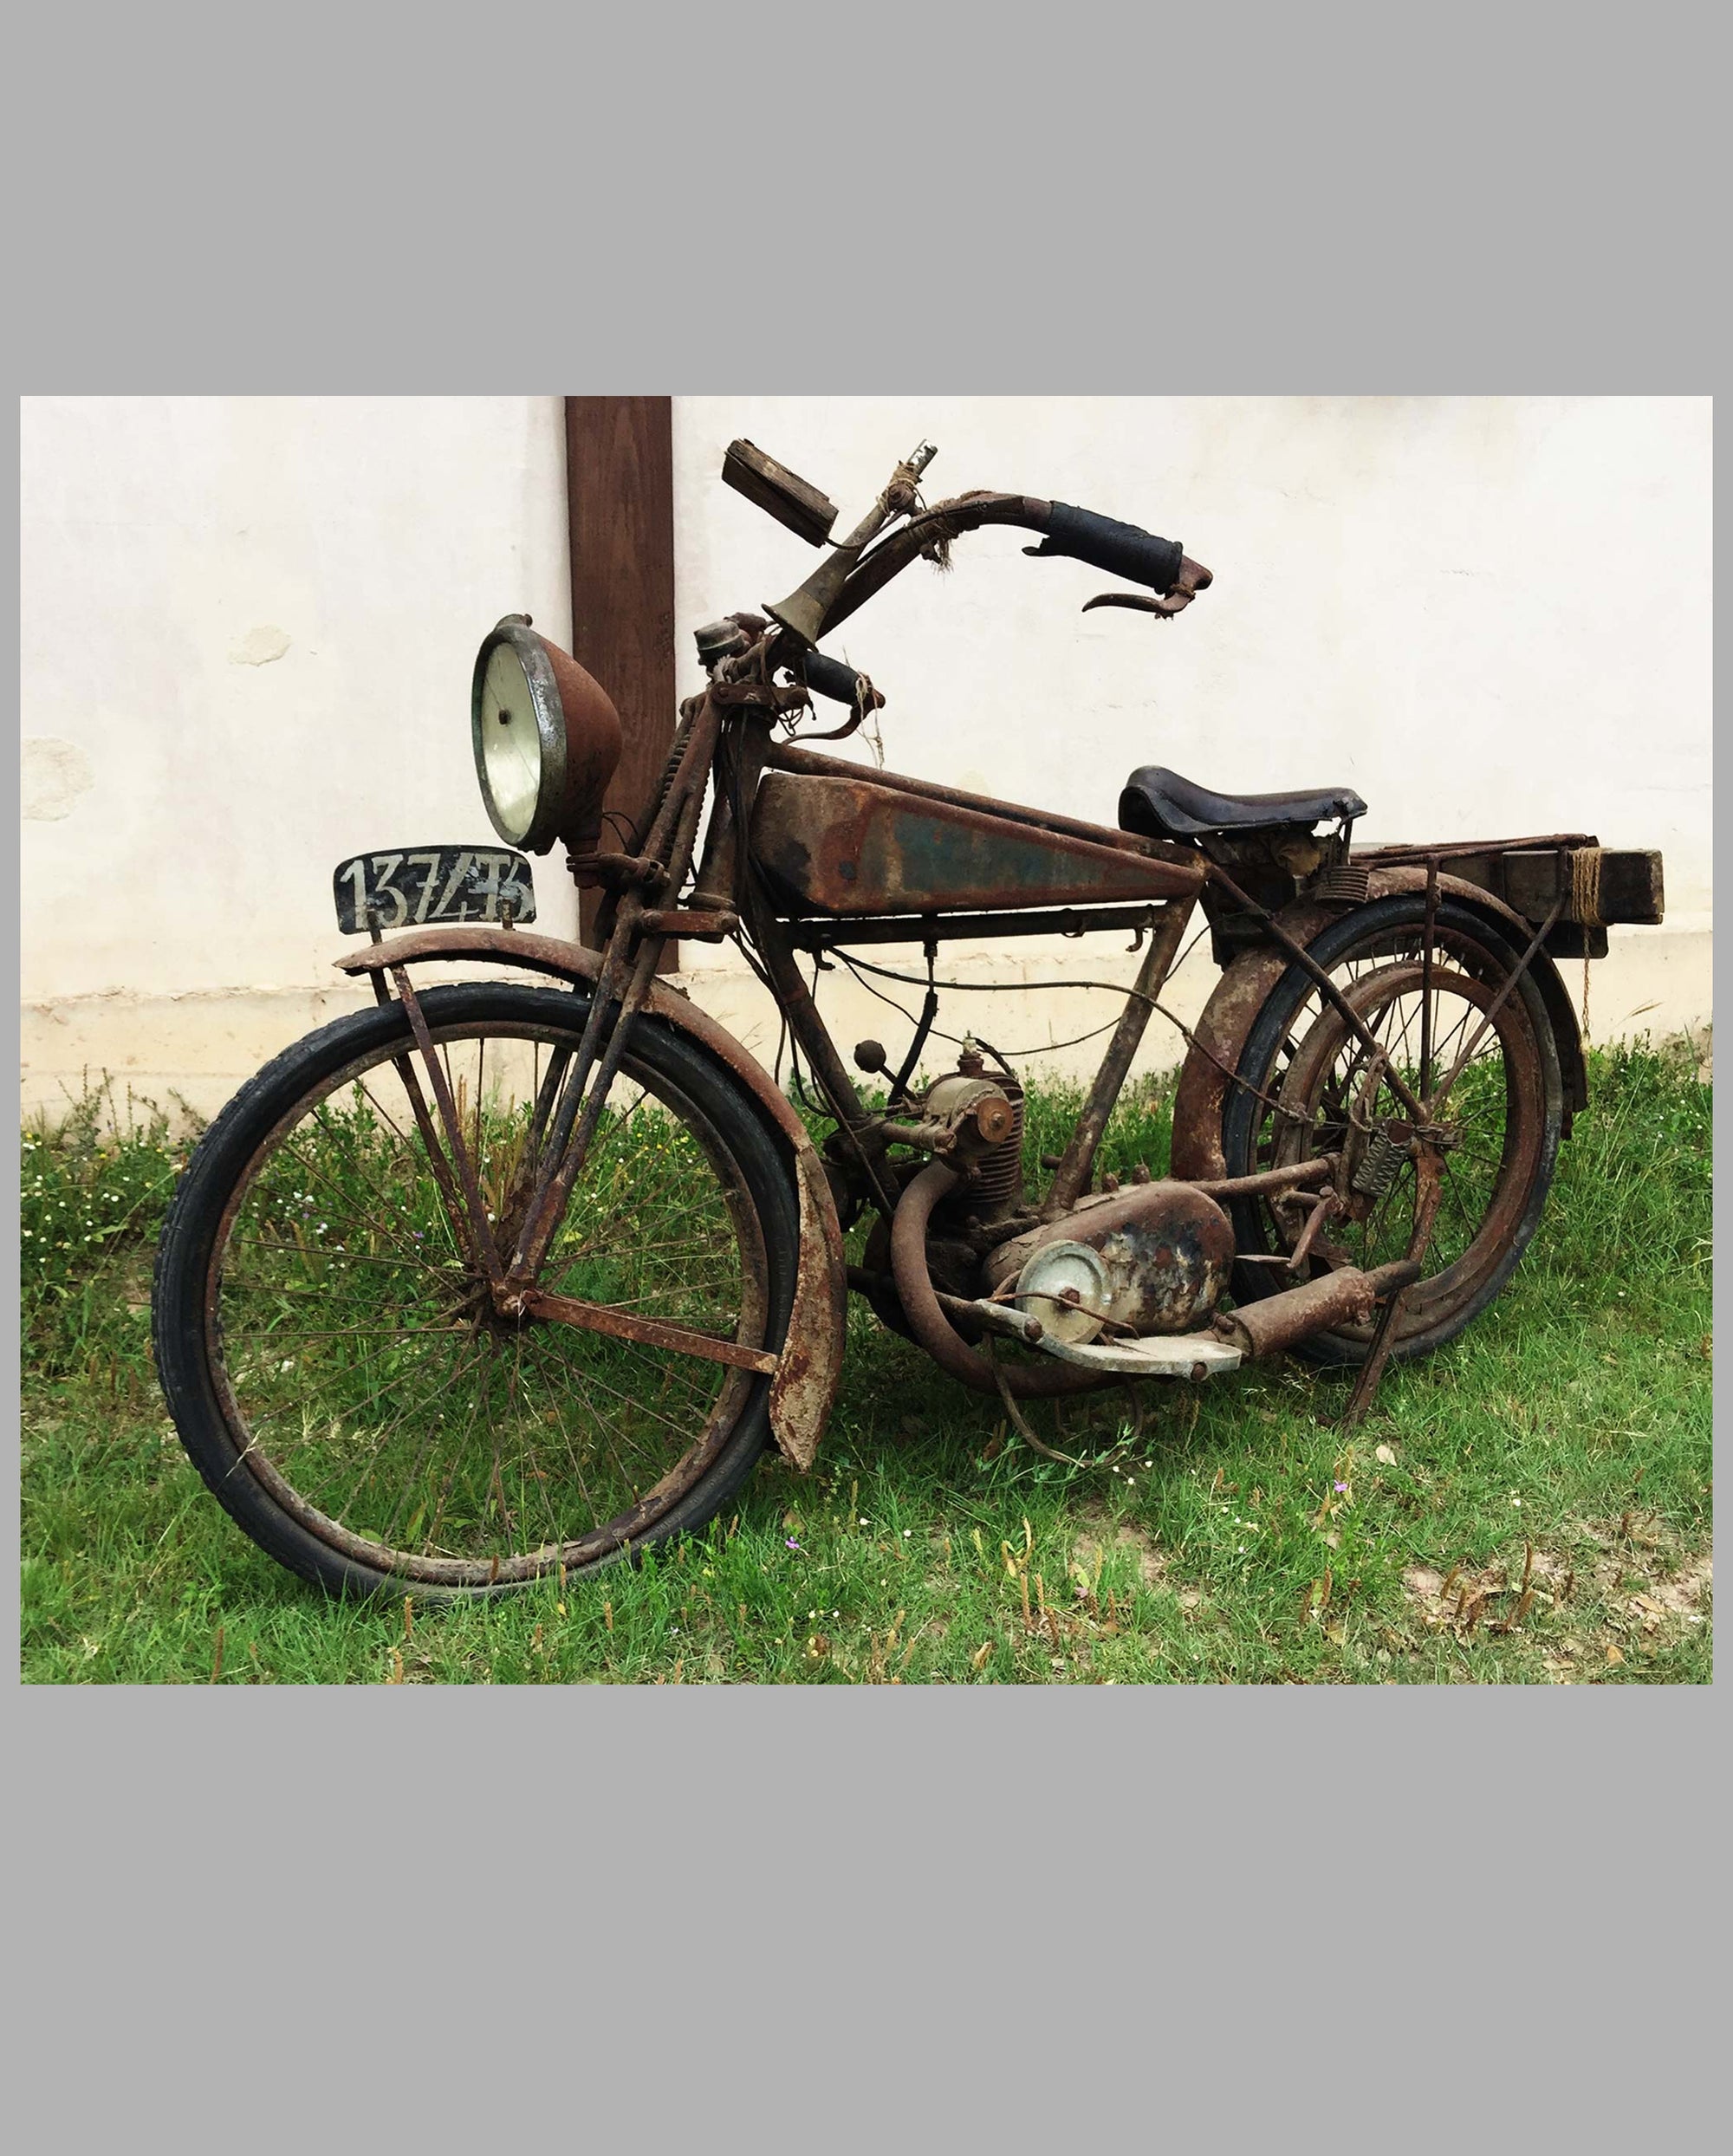 1925-1927 Monet and Goyon Type Z Motorcycle